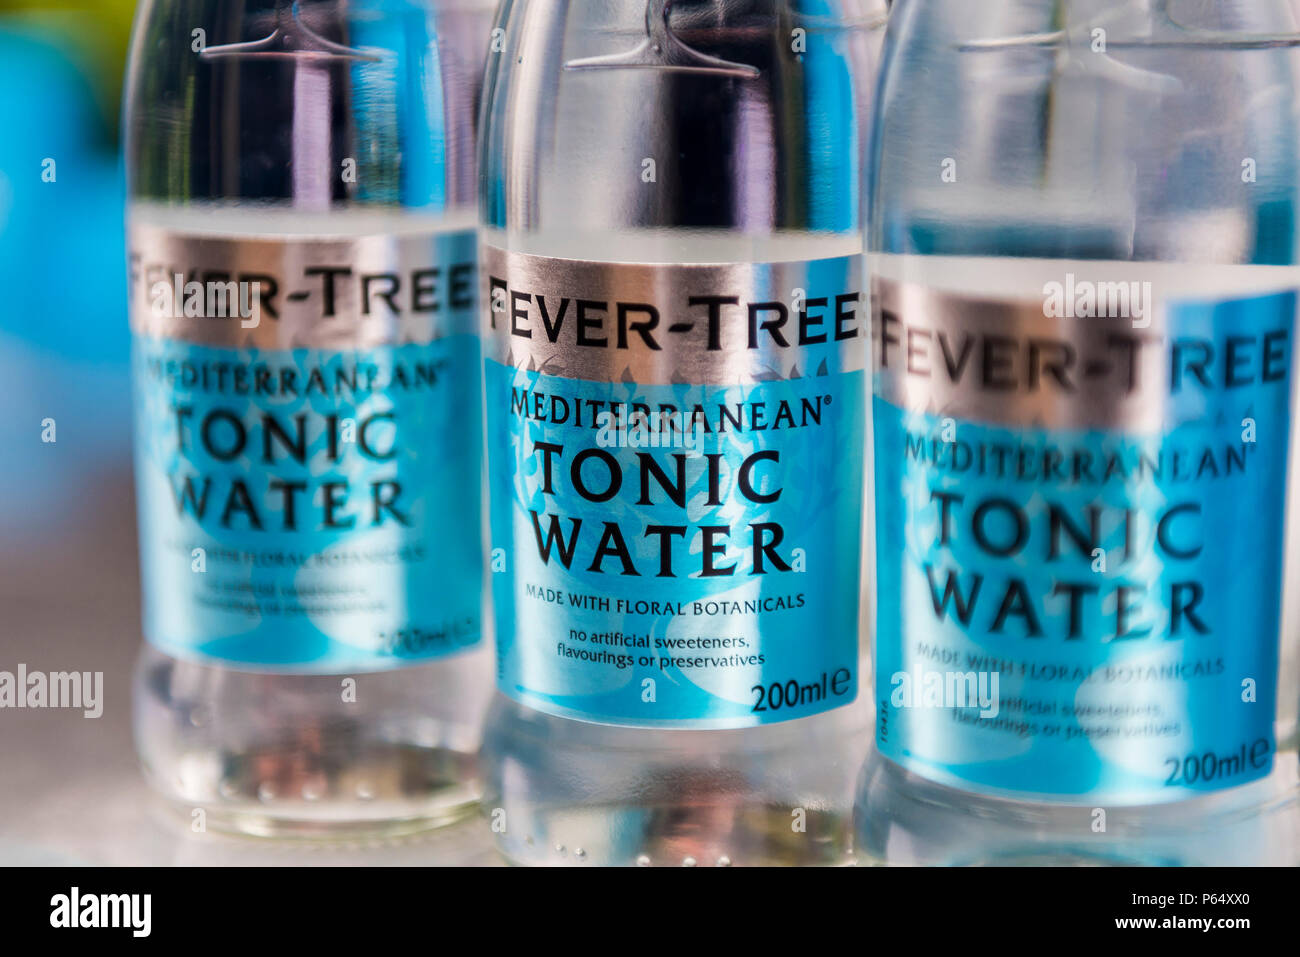 Flaschen Fever-Tree Tonic Water. Stockfoto